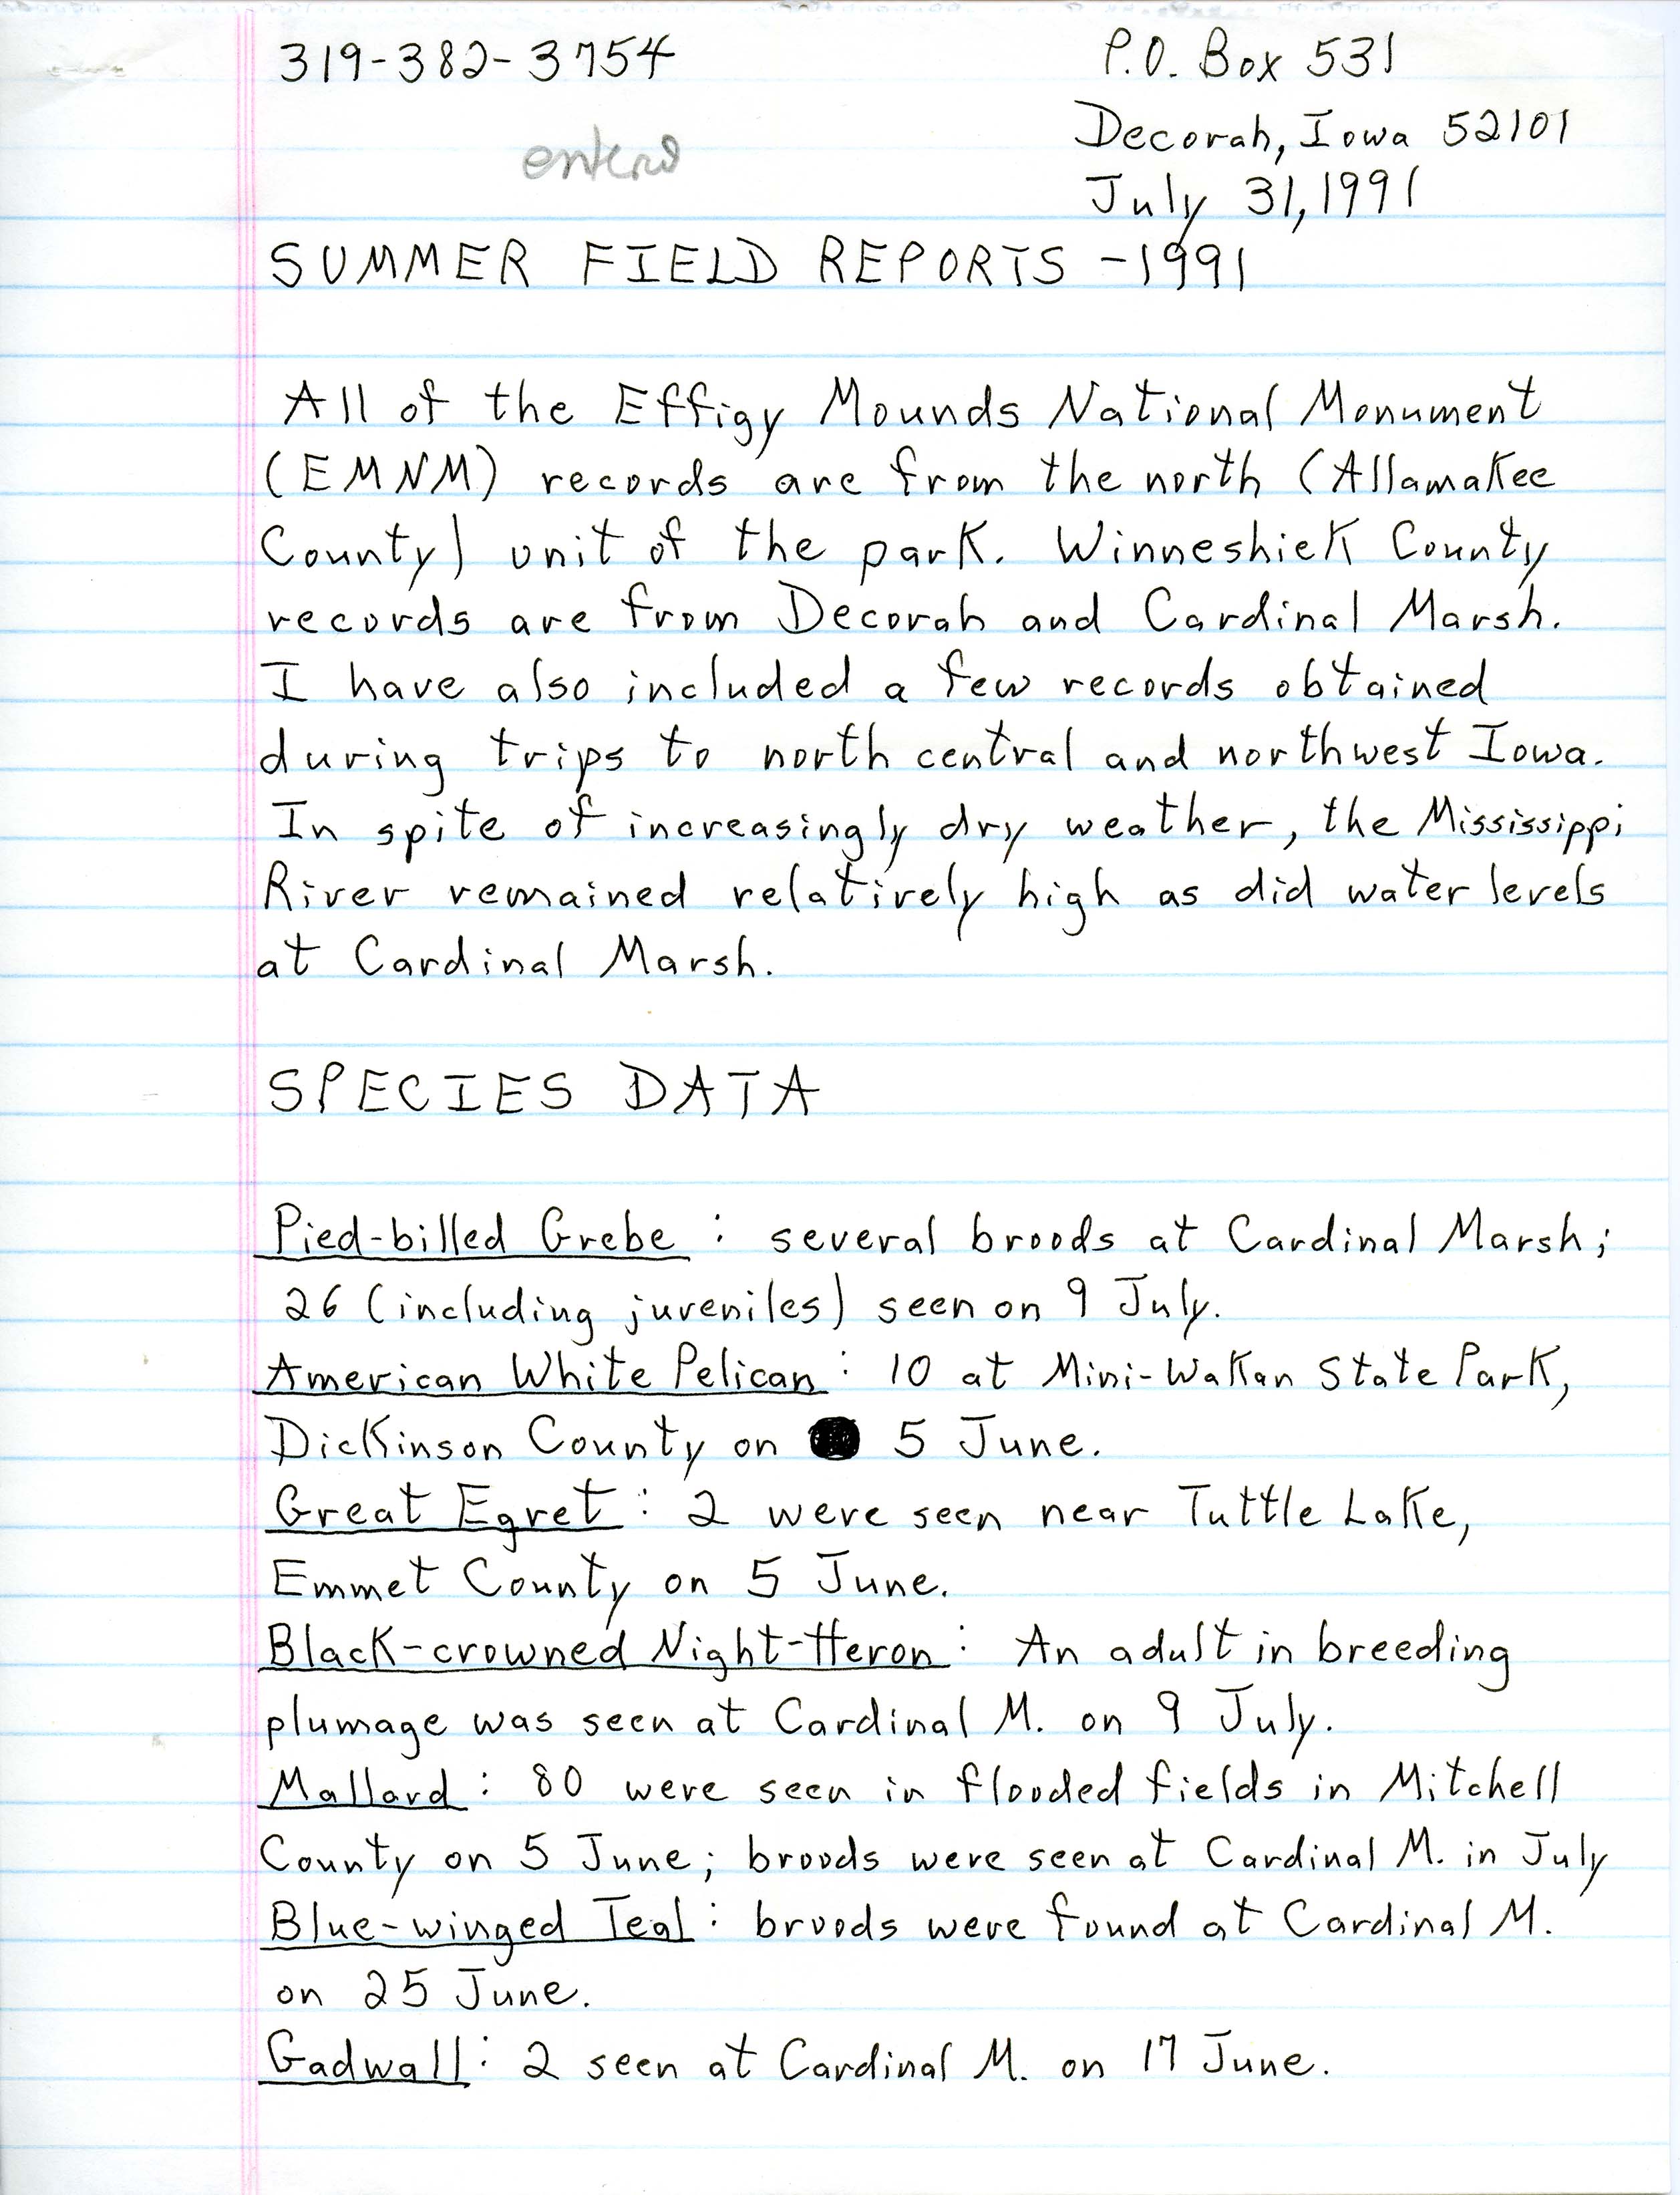 Field notes contributed by Dennis L. Carter, July 31, 1991